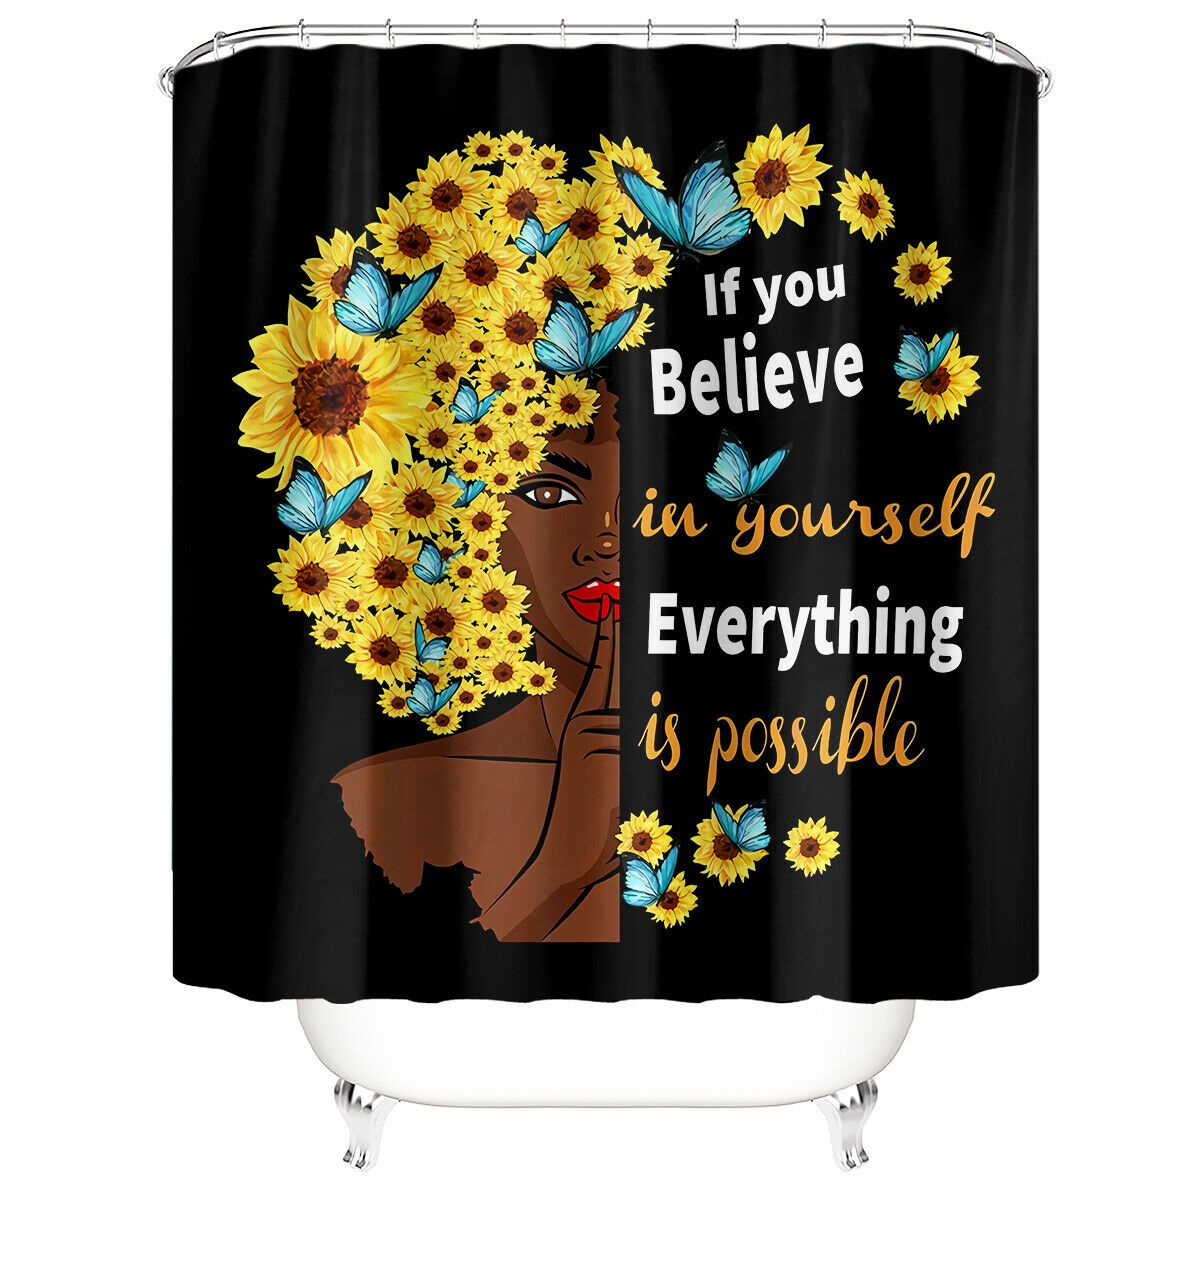 African Woman Fabric Shower Curtain For Bathroom-STYLEGOING